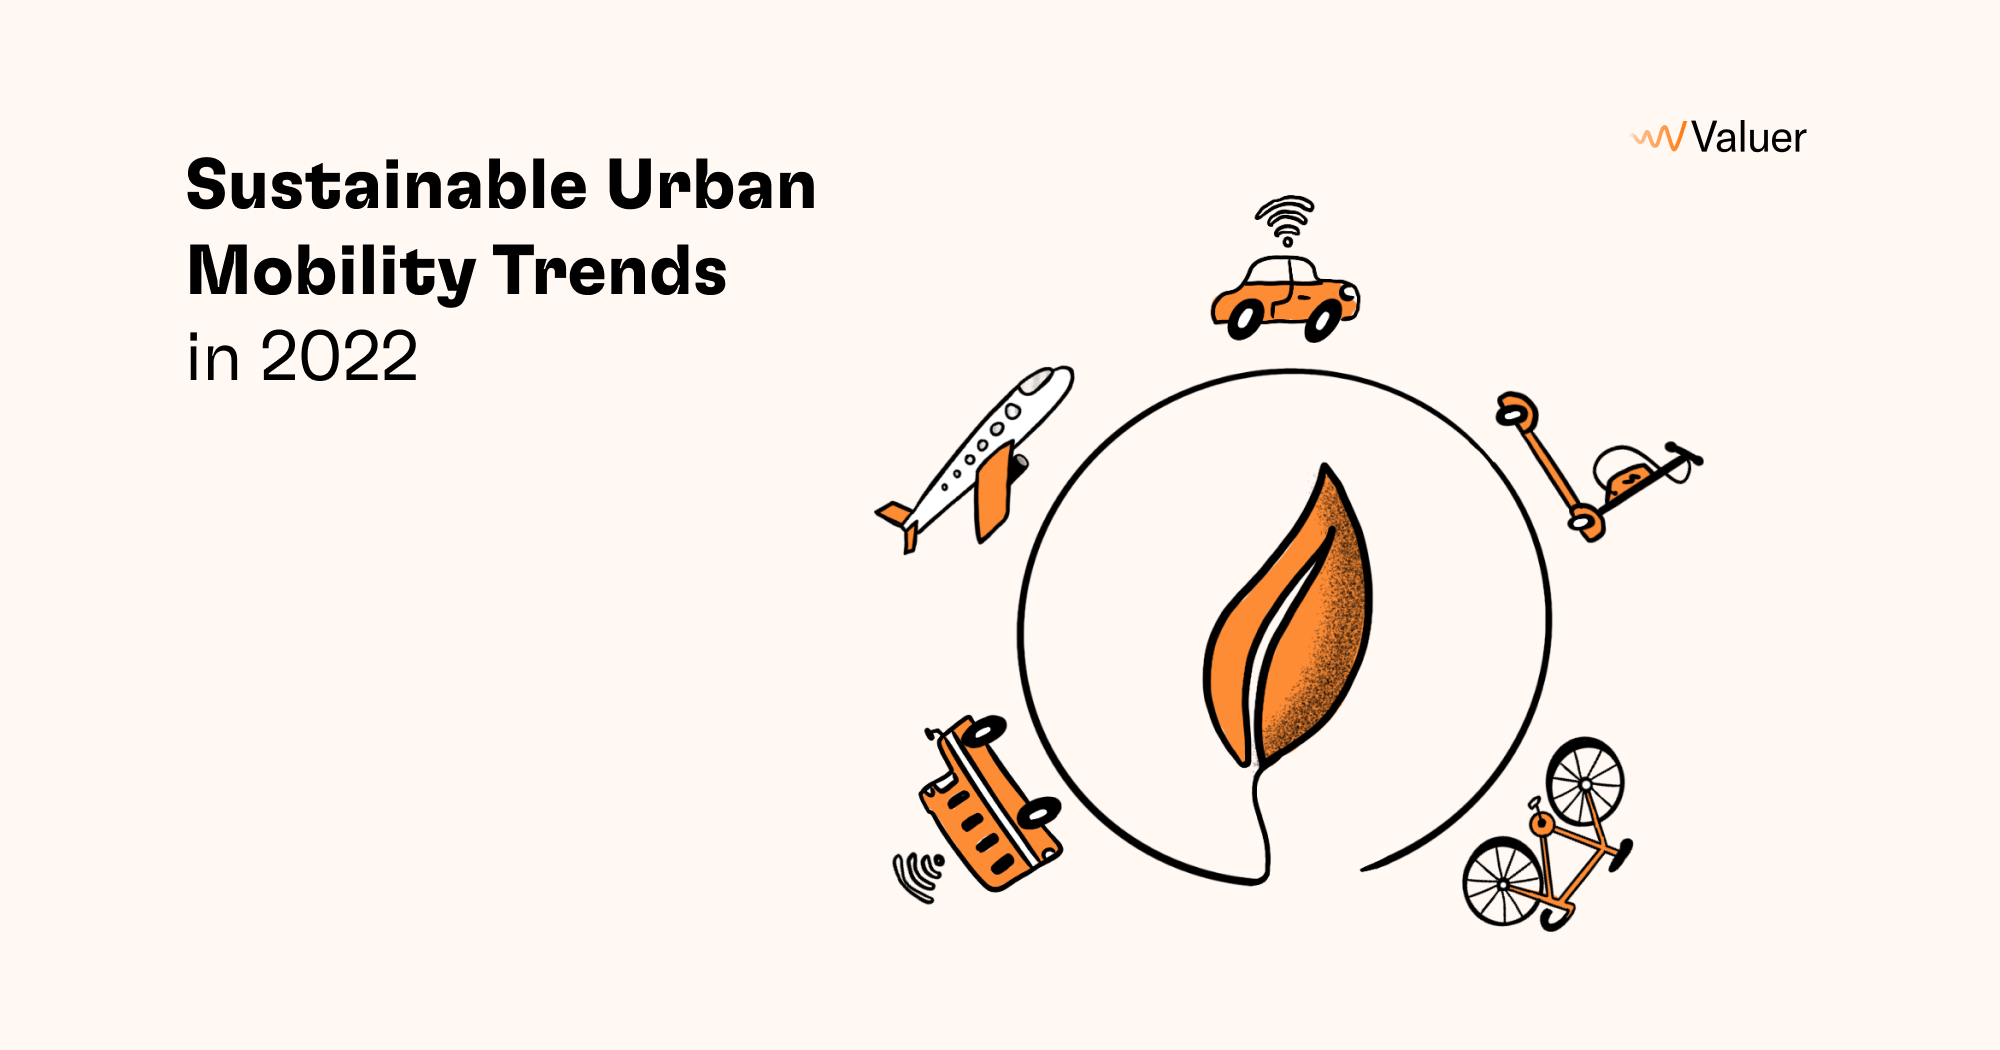 Sustainable Urban Mobility Trends in 2022